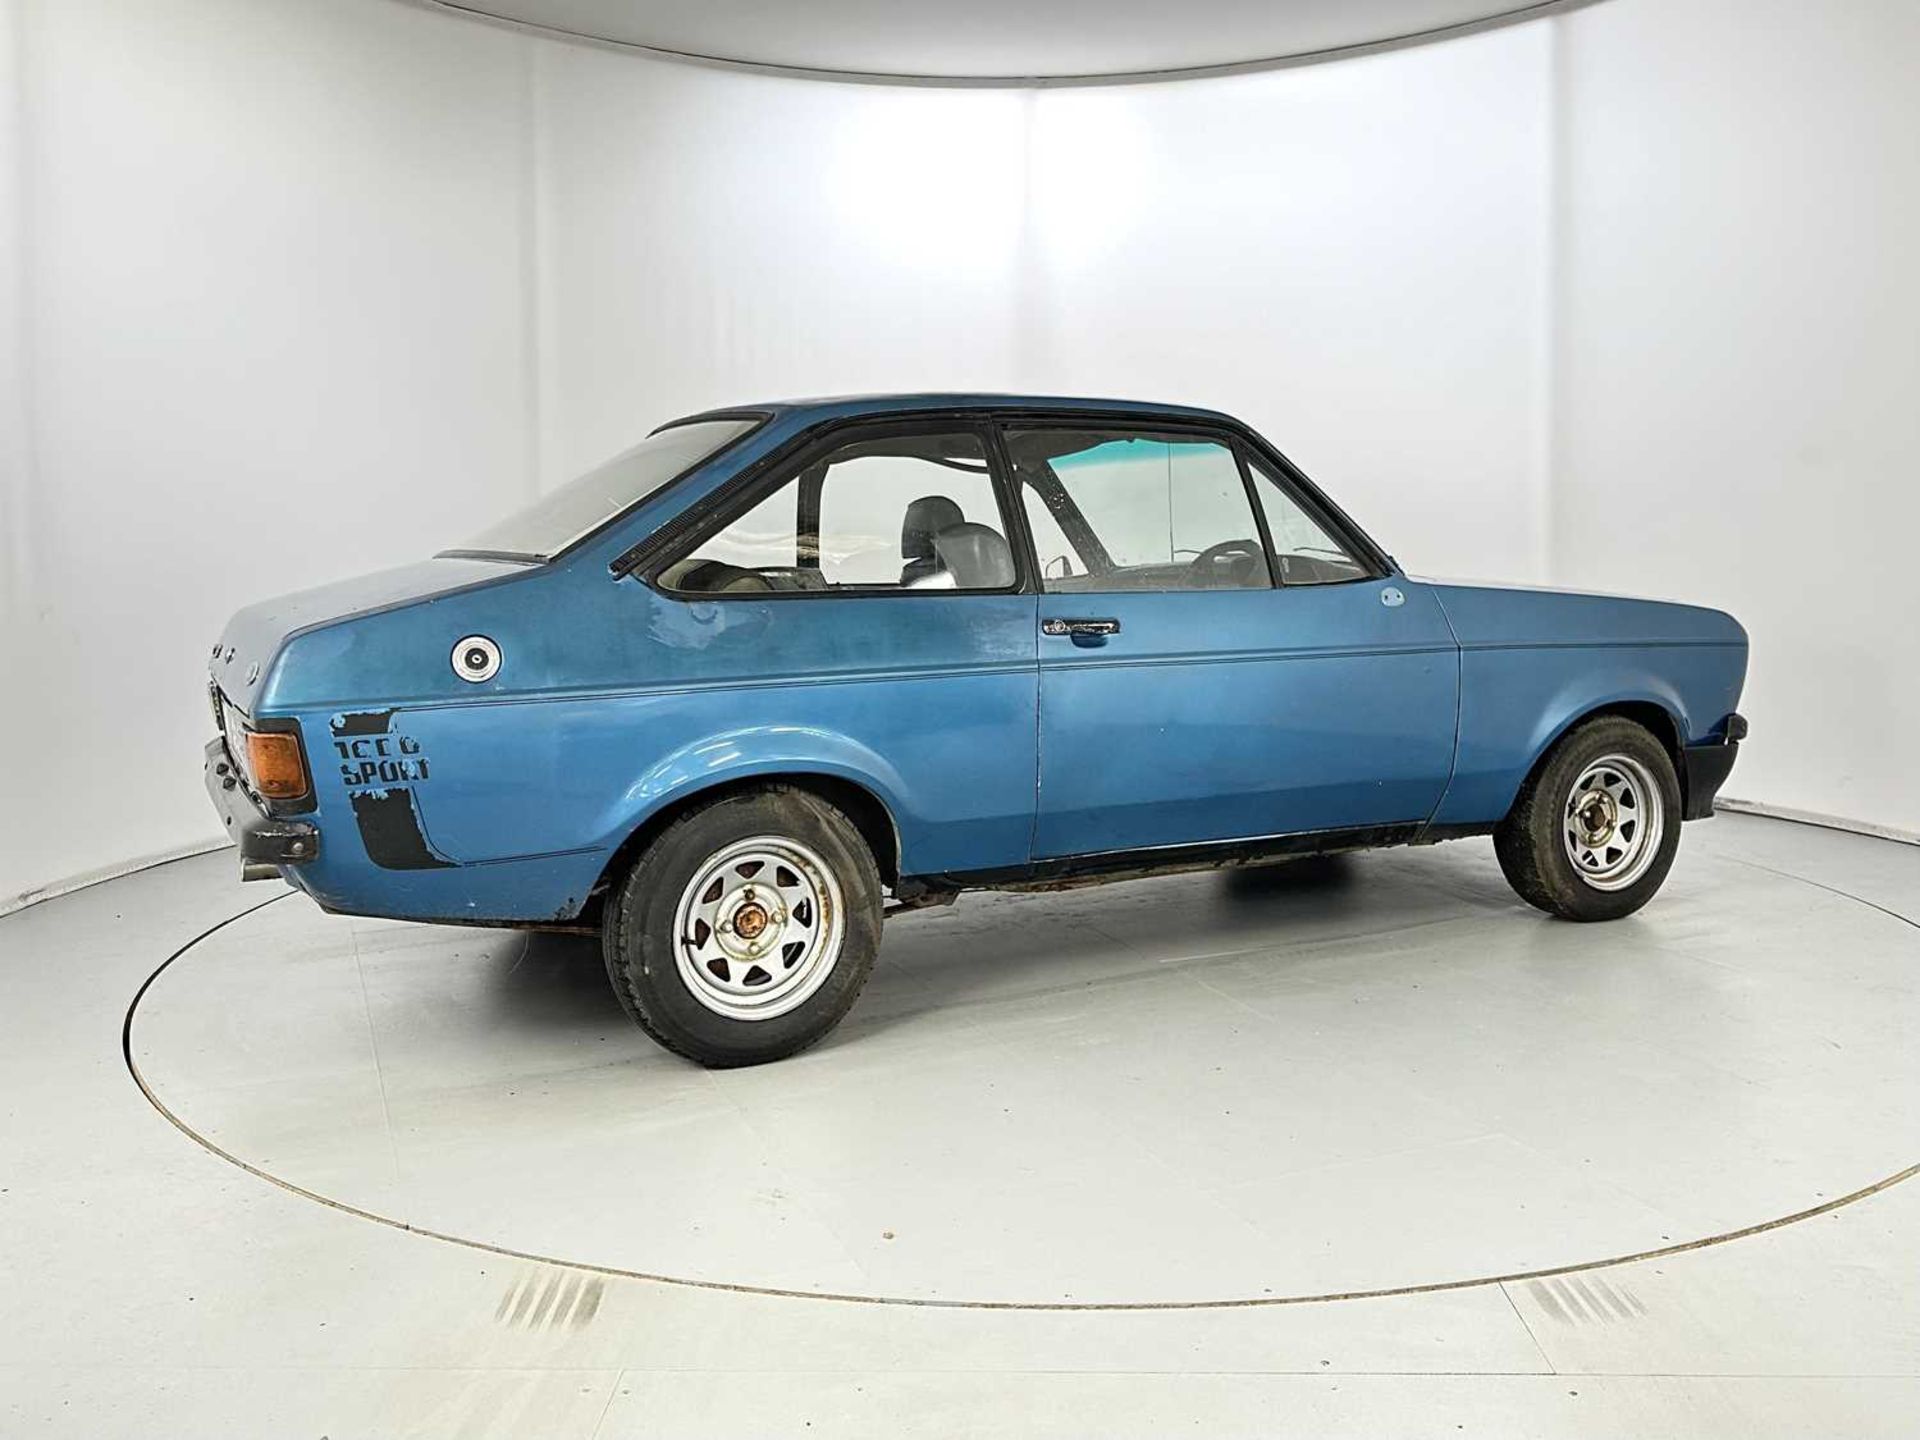 1979 Ford Escort 1600 Sport - Image 10 of 22